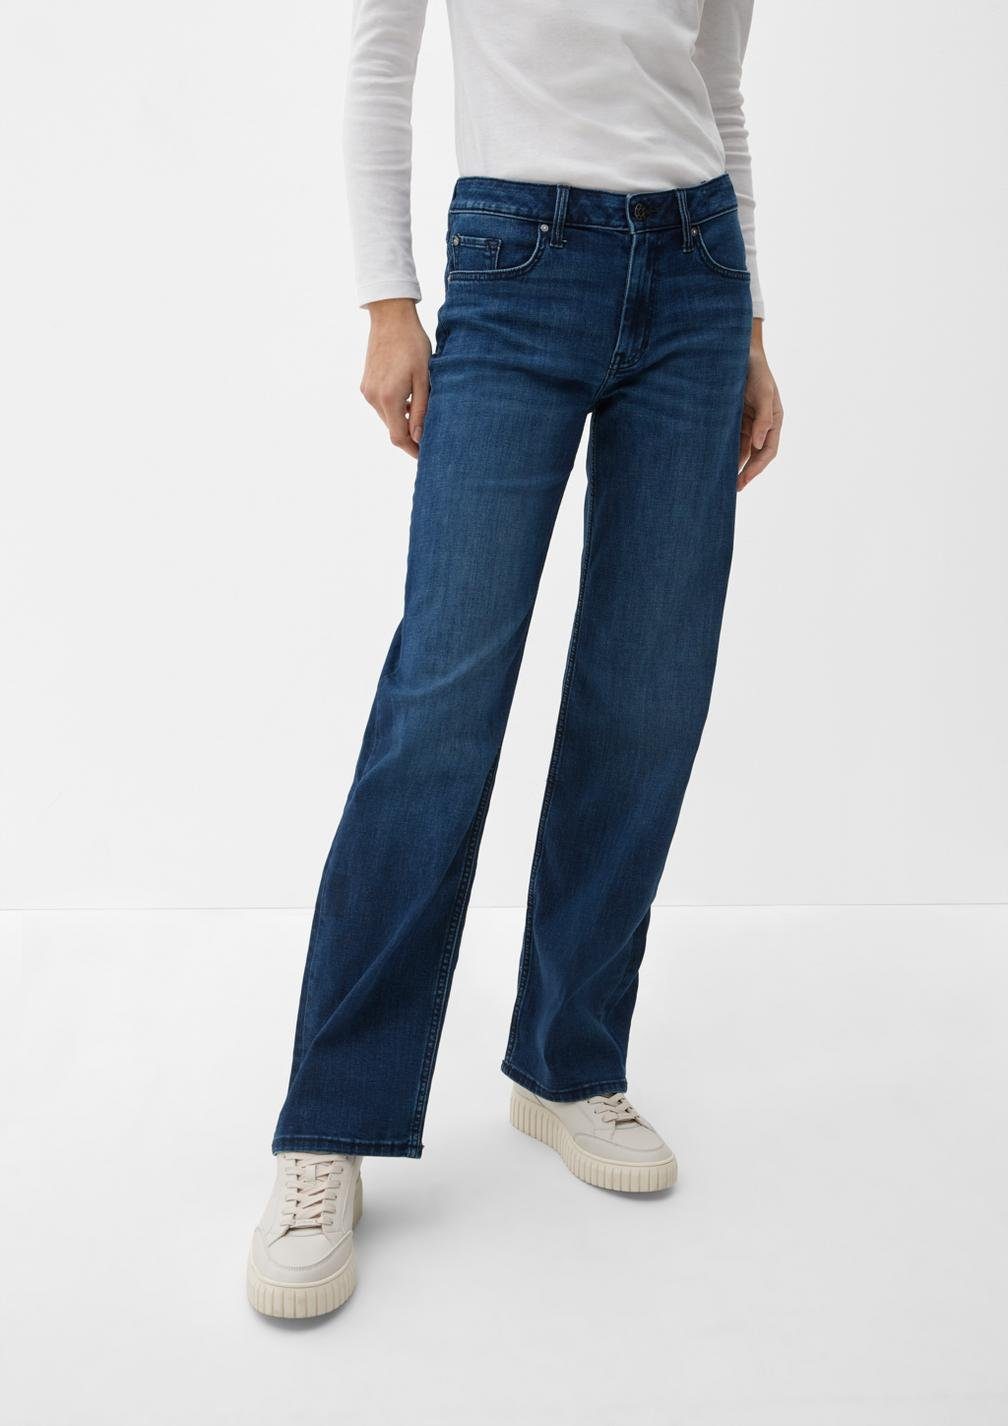 Comfort-fit-Jeans Mid / rise mit leichter KAROLIN / Relaxed Fit Straight tiefblau s.Oliver Leg Waschung,